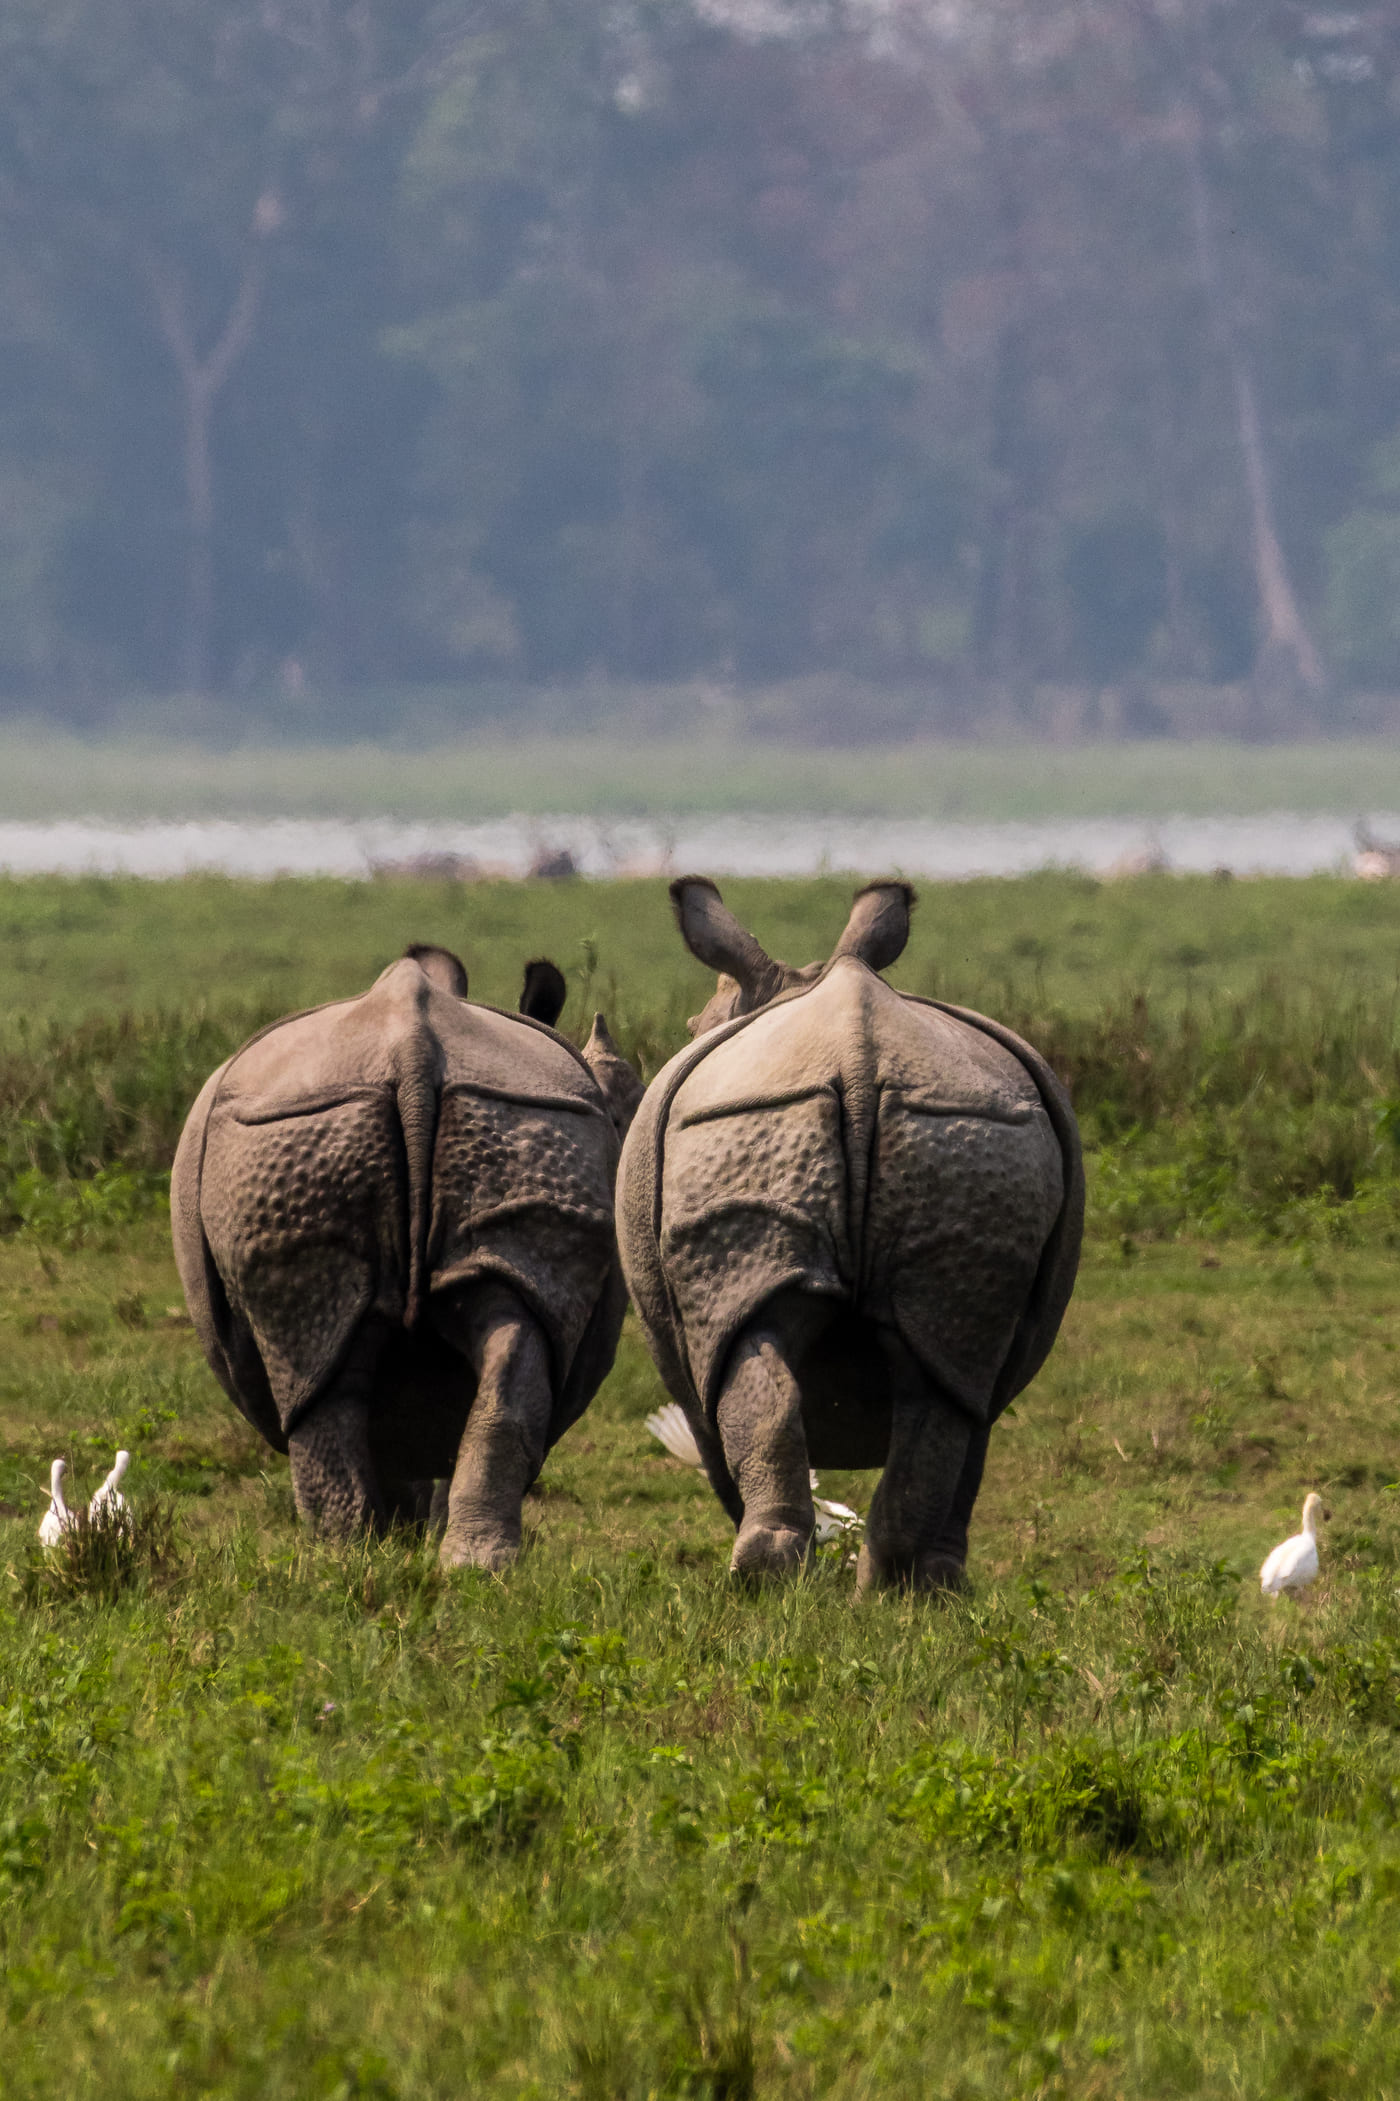 Indian rhinoceros also called the Greater One Horned rhinoceros picture is taken at Kaziranga National Park in India 